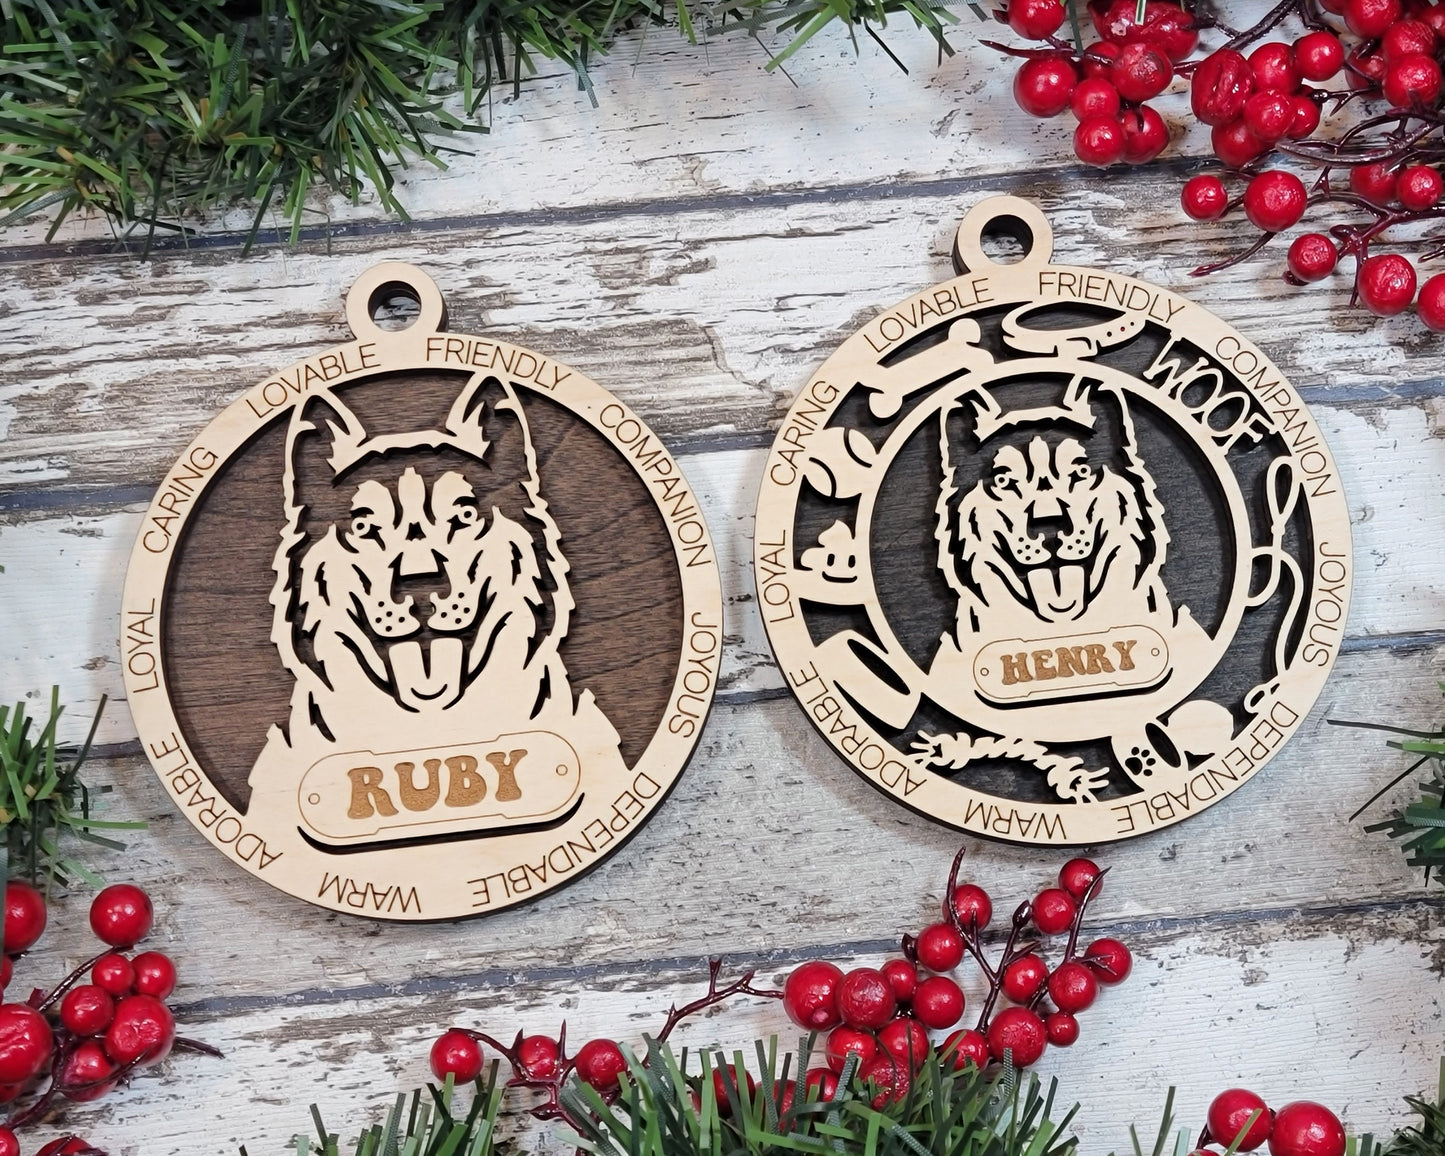 Husky - Adorable Dog Ornaments - 2 Ornaments included - SVG, PDF, AI File Download - Sized for Glowforge